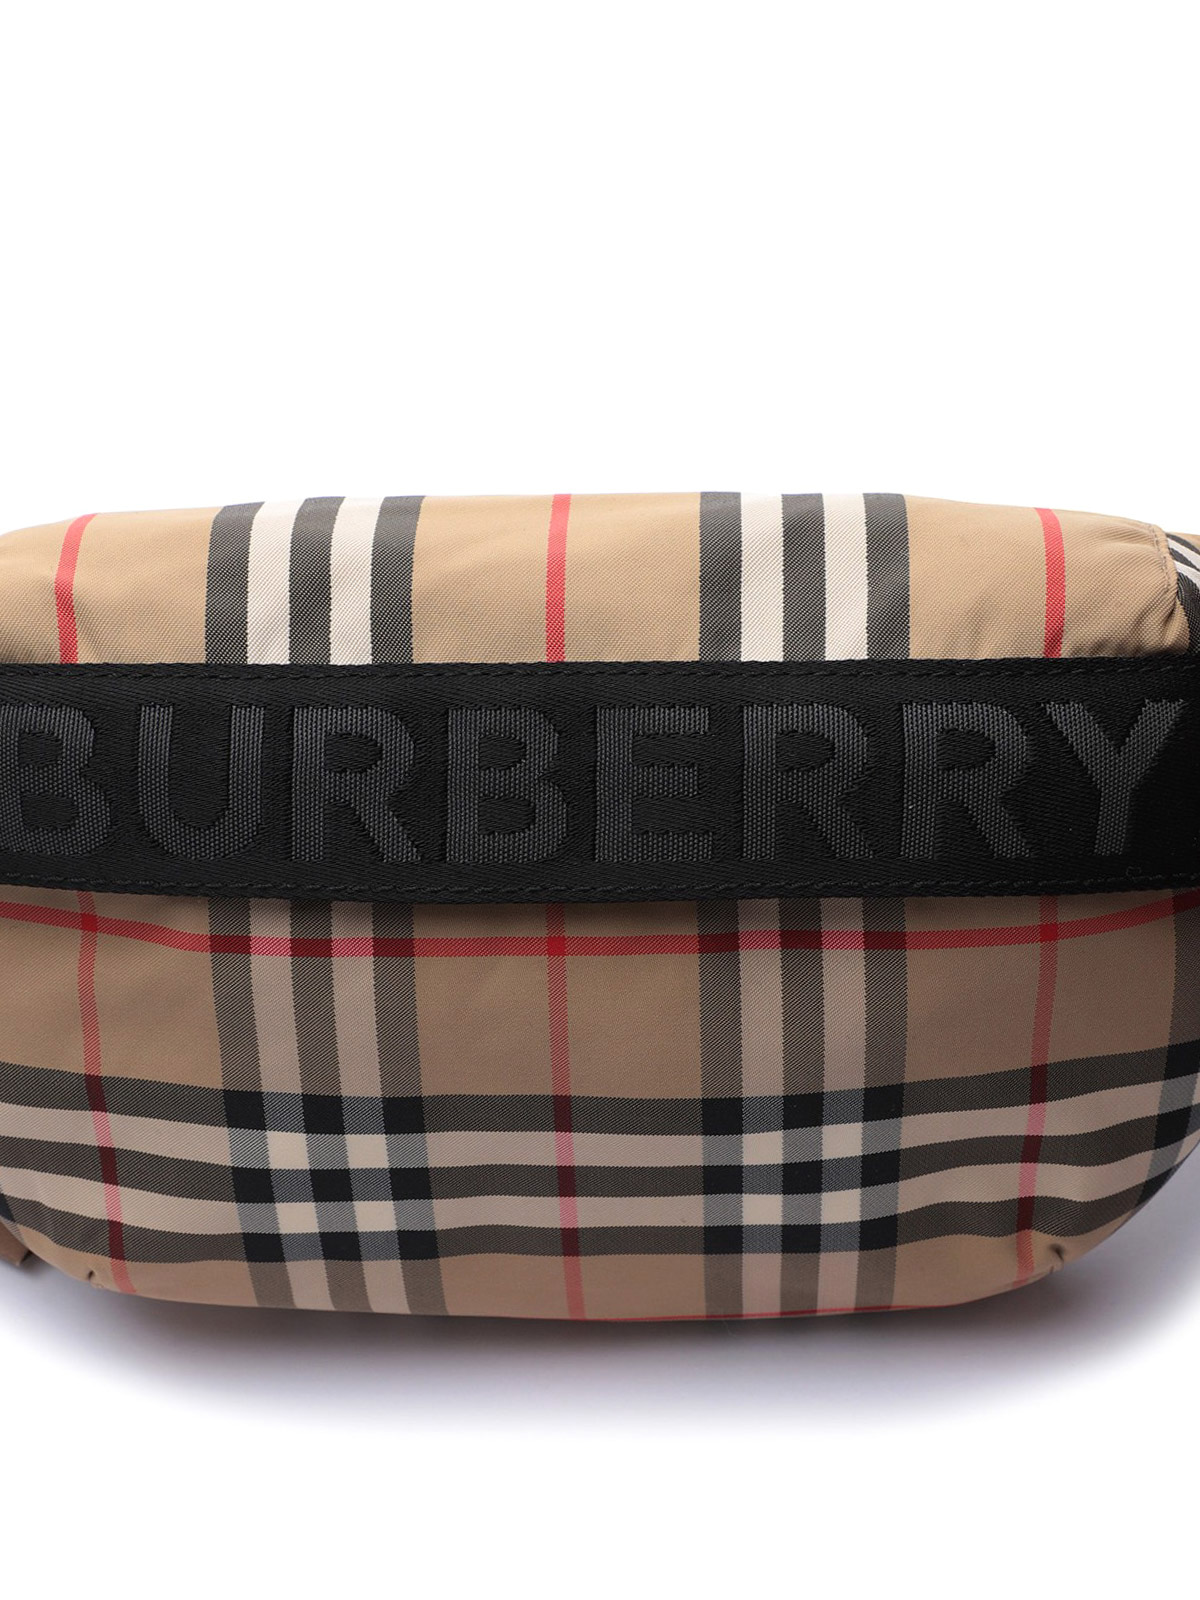 burberry dog bed